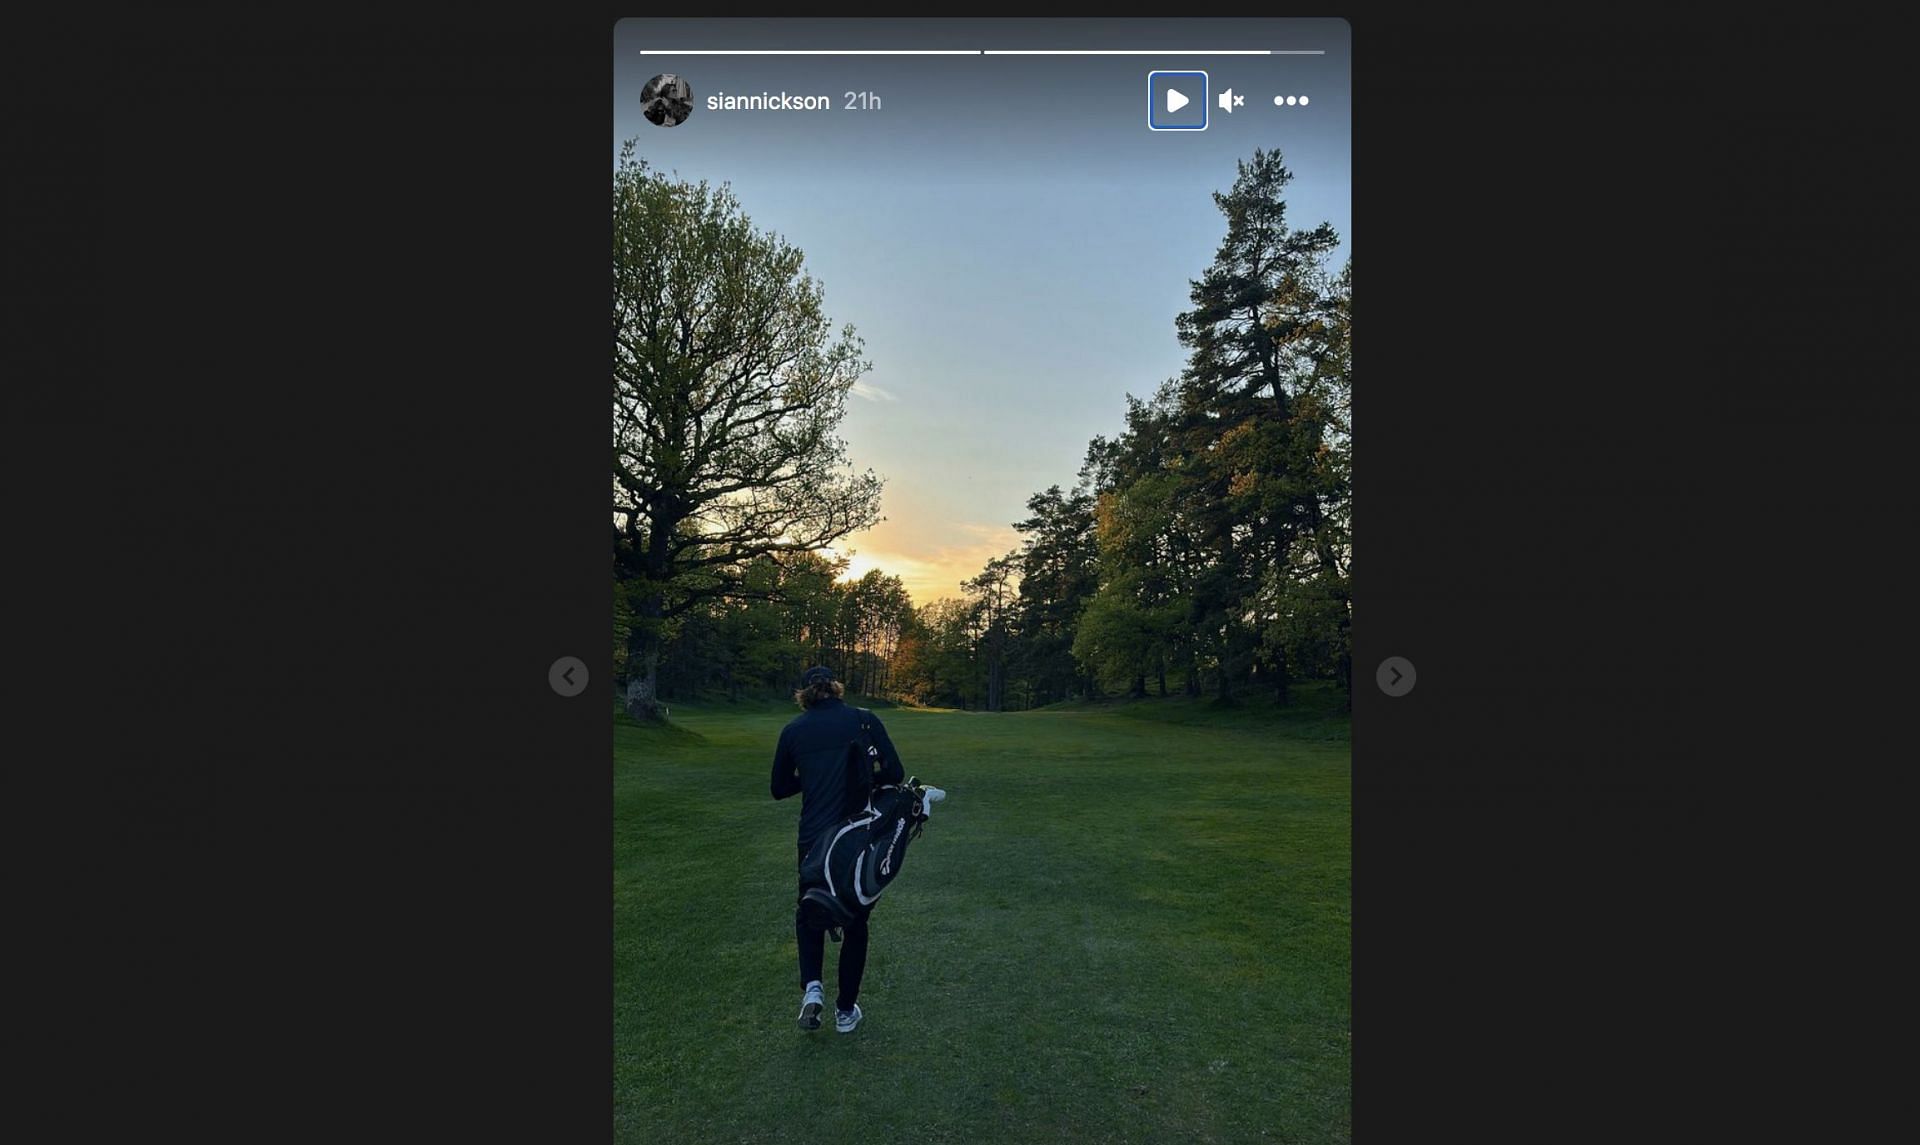 IN PHOTOS: Adrian Kempe golfing in the offseason with girlfriend